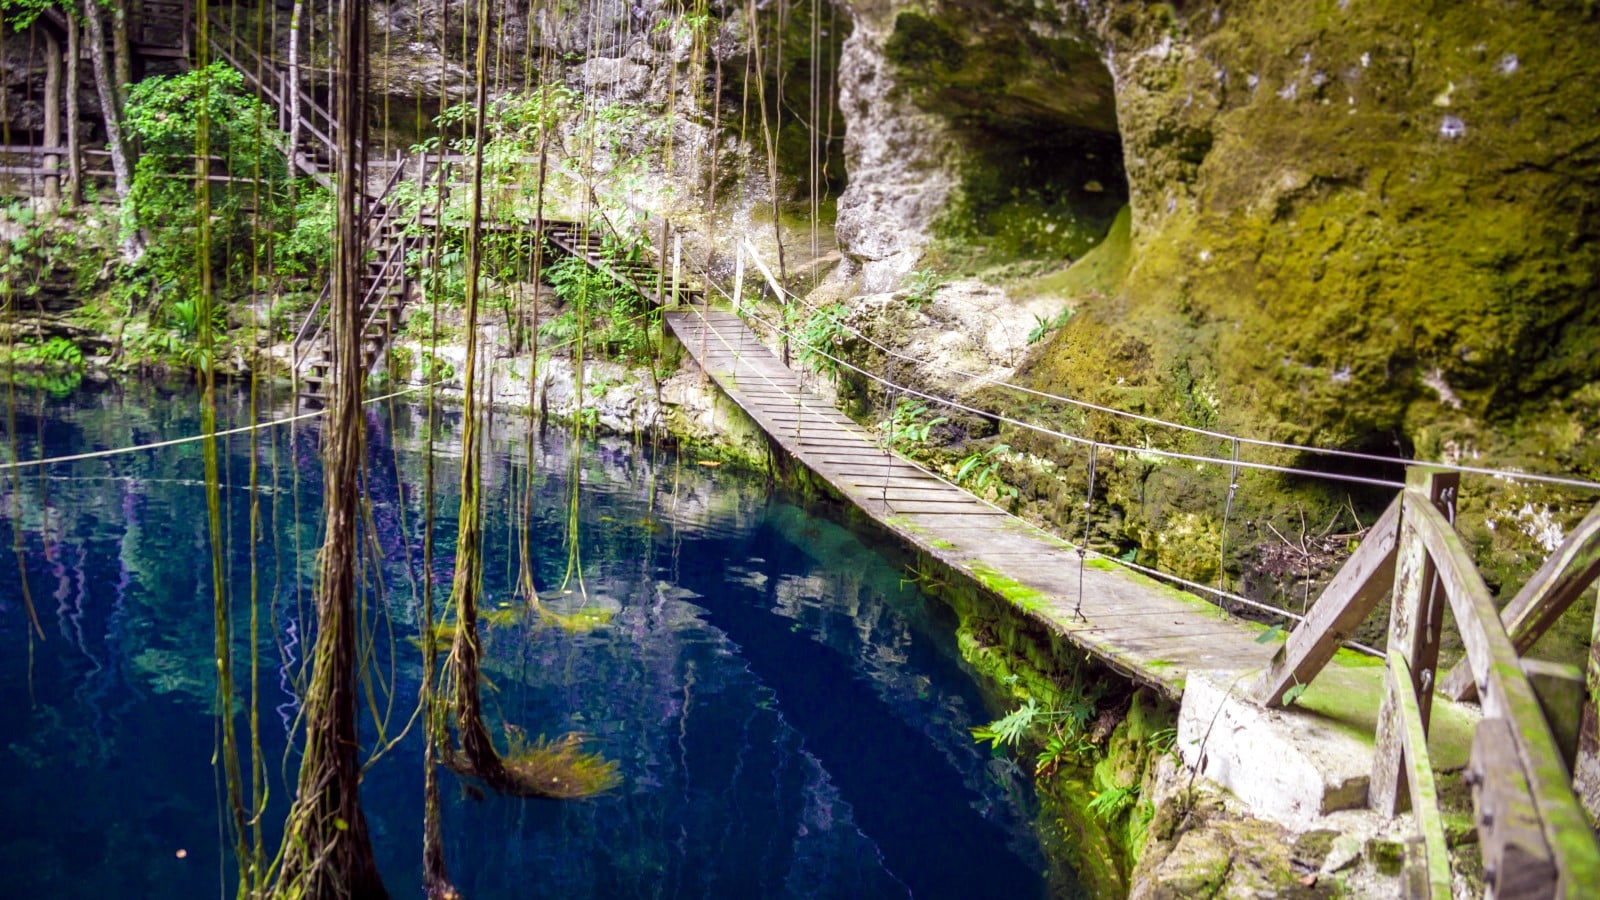 X'Canche Cenote is close to Ek Balam near Valladolid